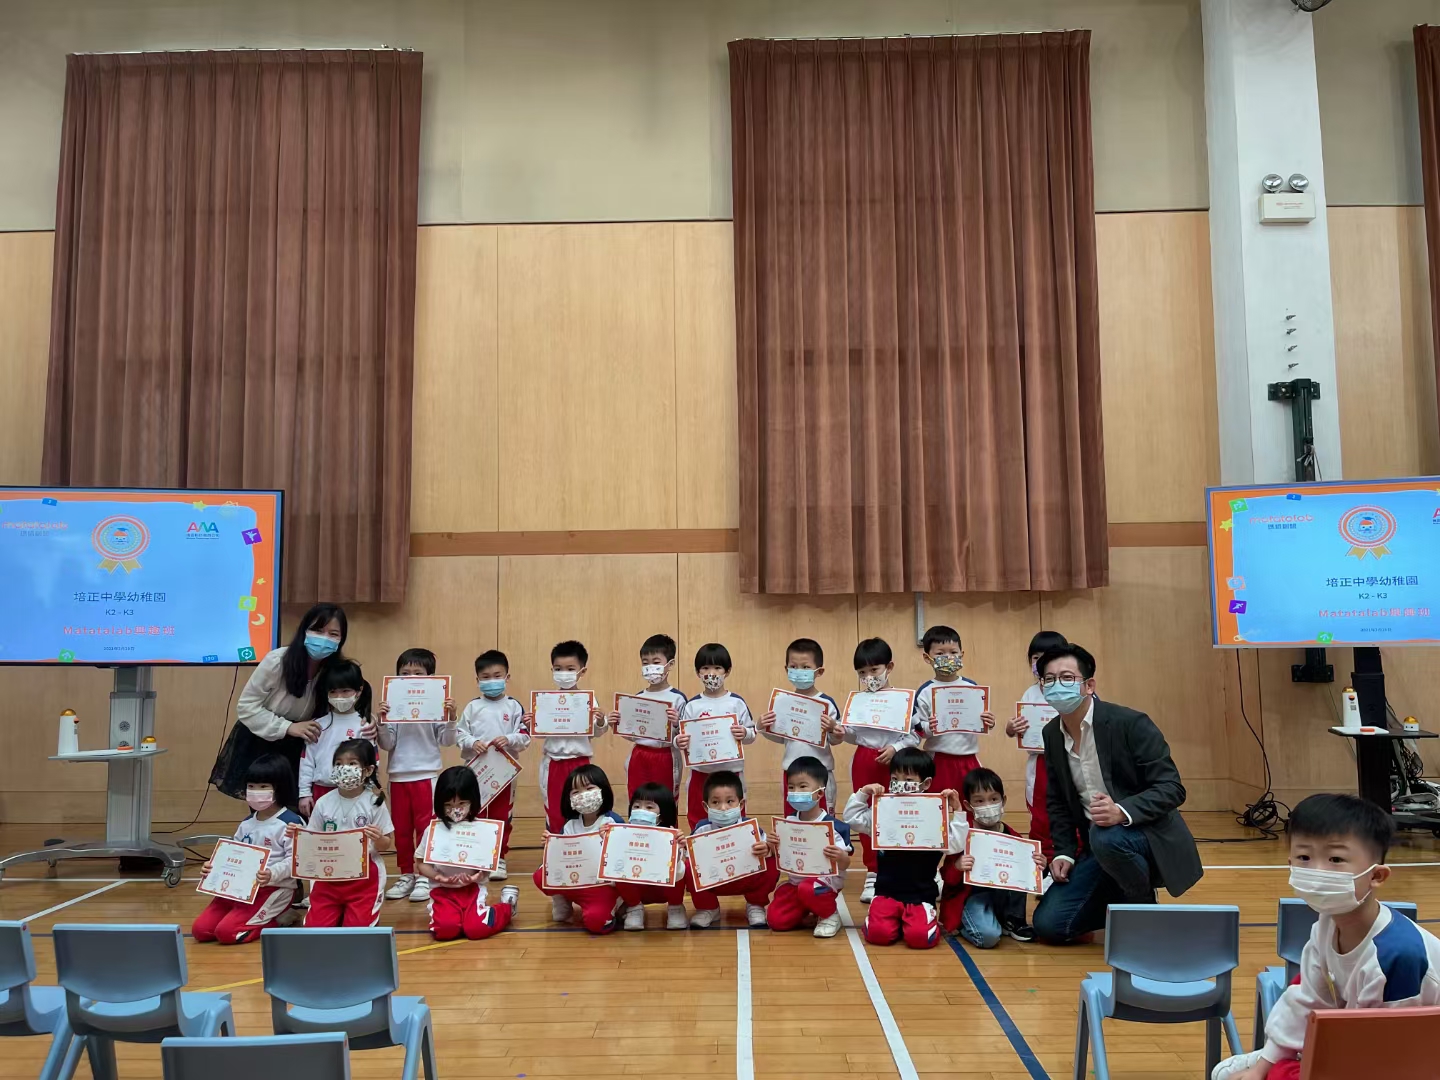 End-of-Afterschool-Program Exhibition by the Kindergarten Section of Pui Ching Middle School Macau